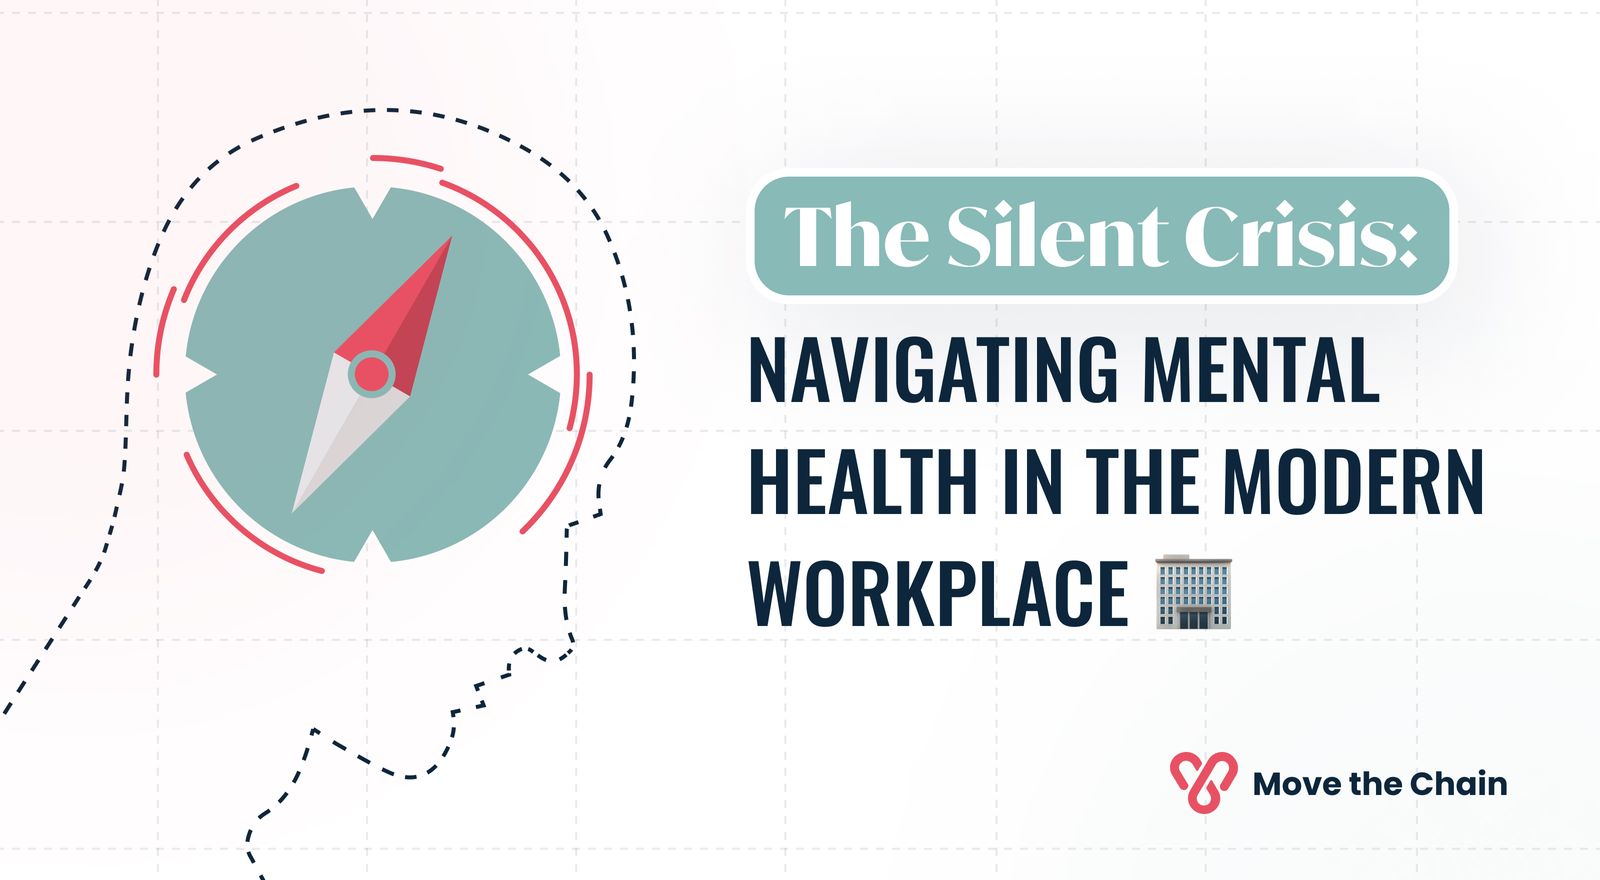 The Silent Crisis: Navigating Mental Health in the Modern Workplace